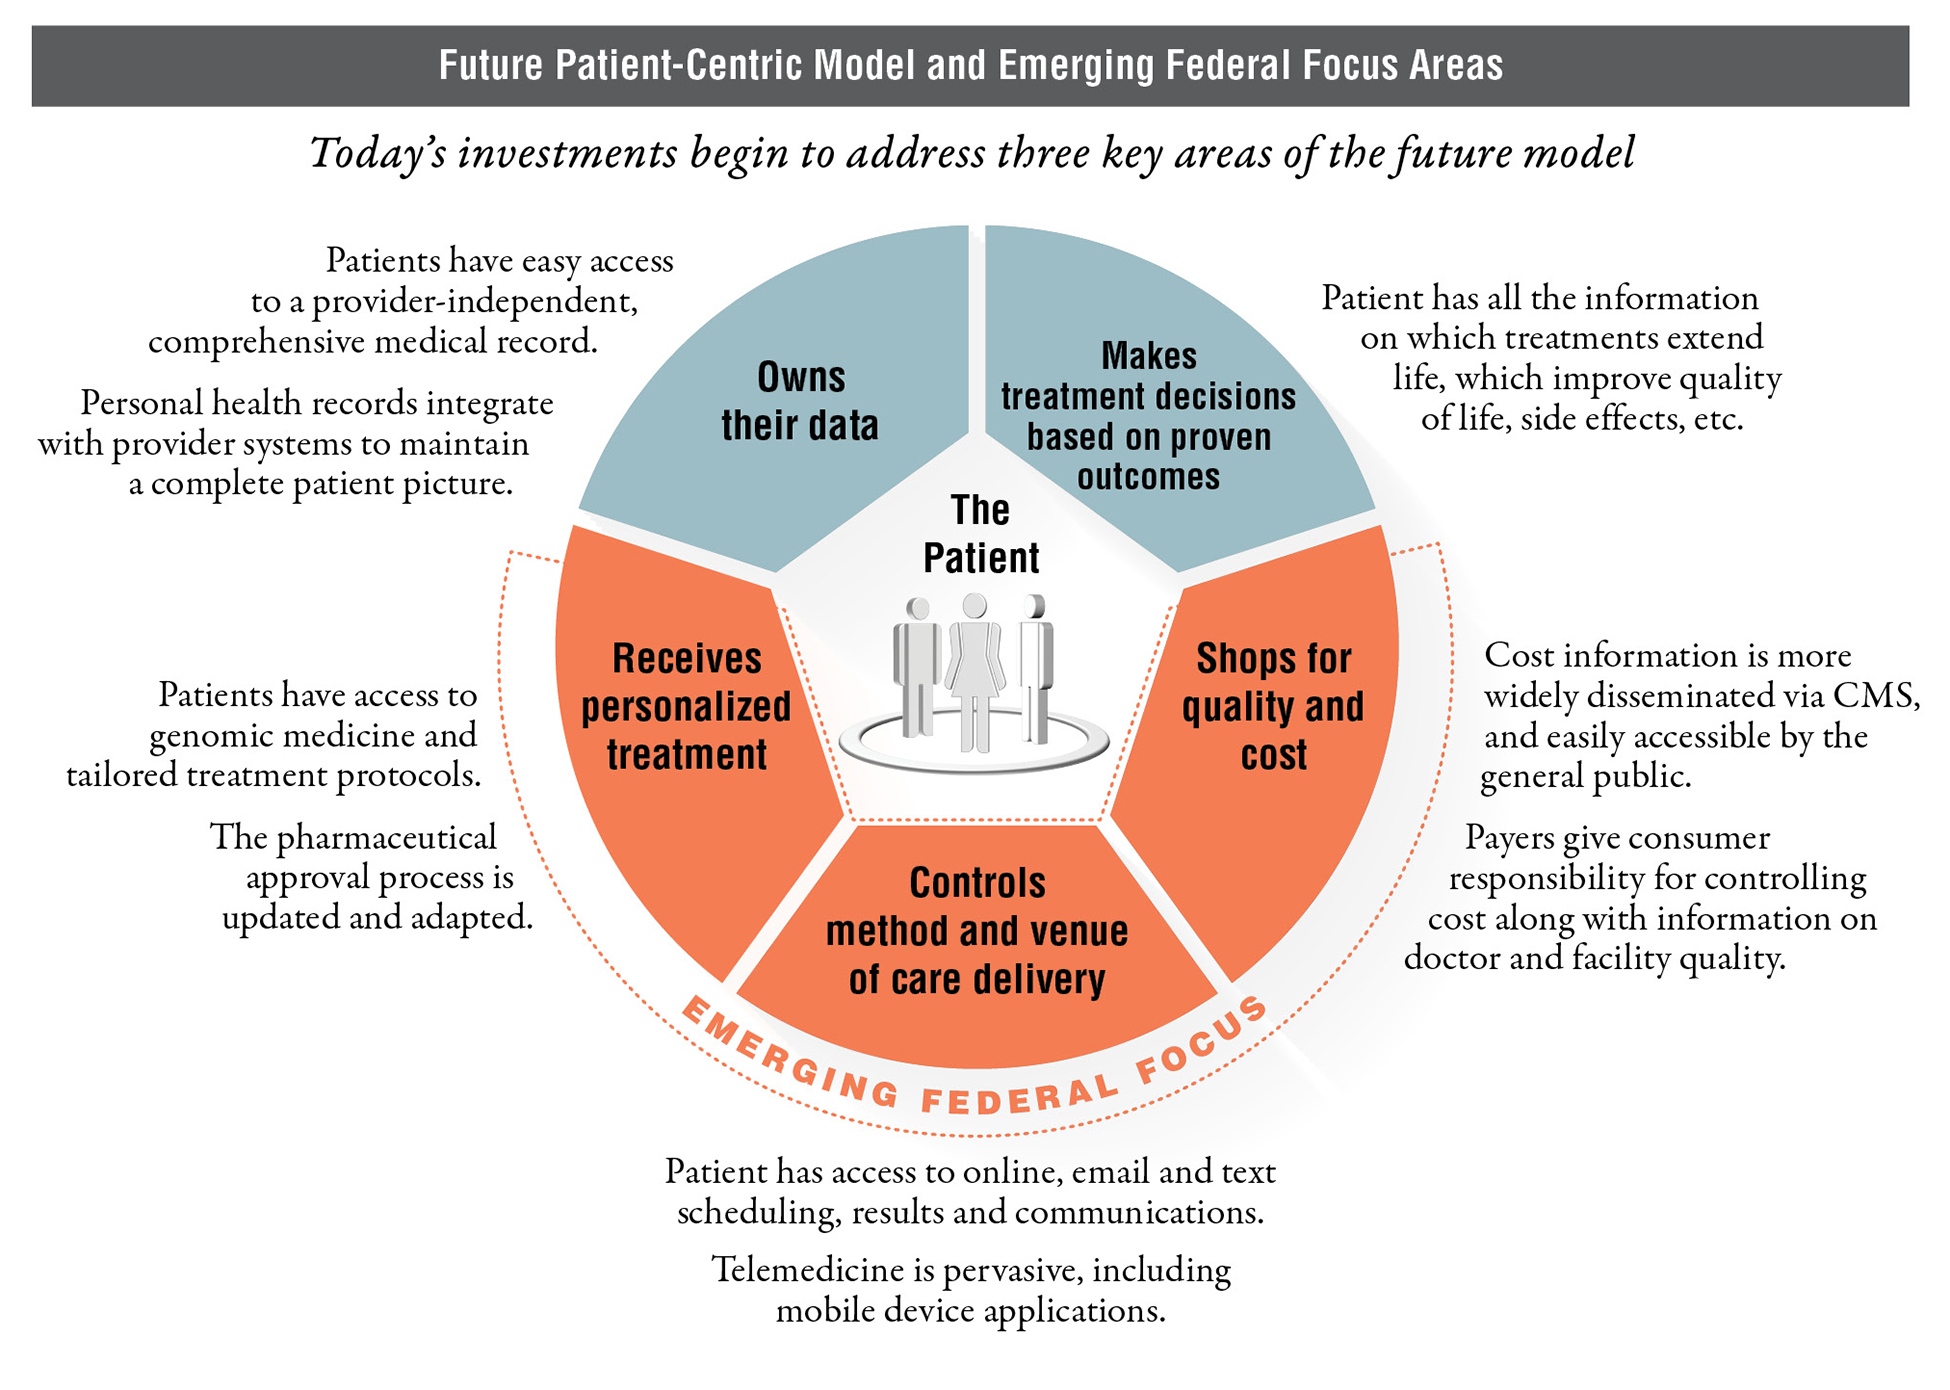 Future Patient-Centric Model and Emerging Federal Focus Areas